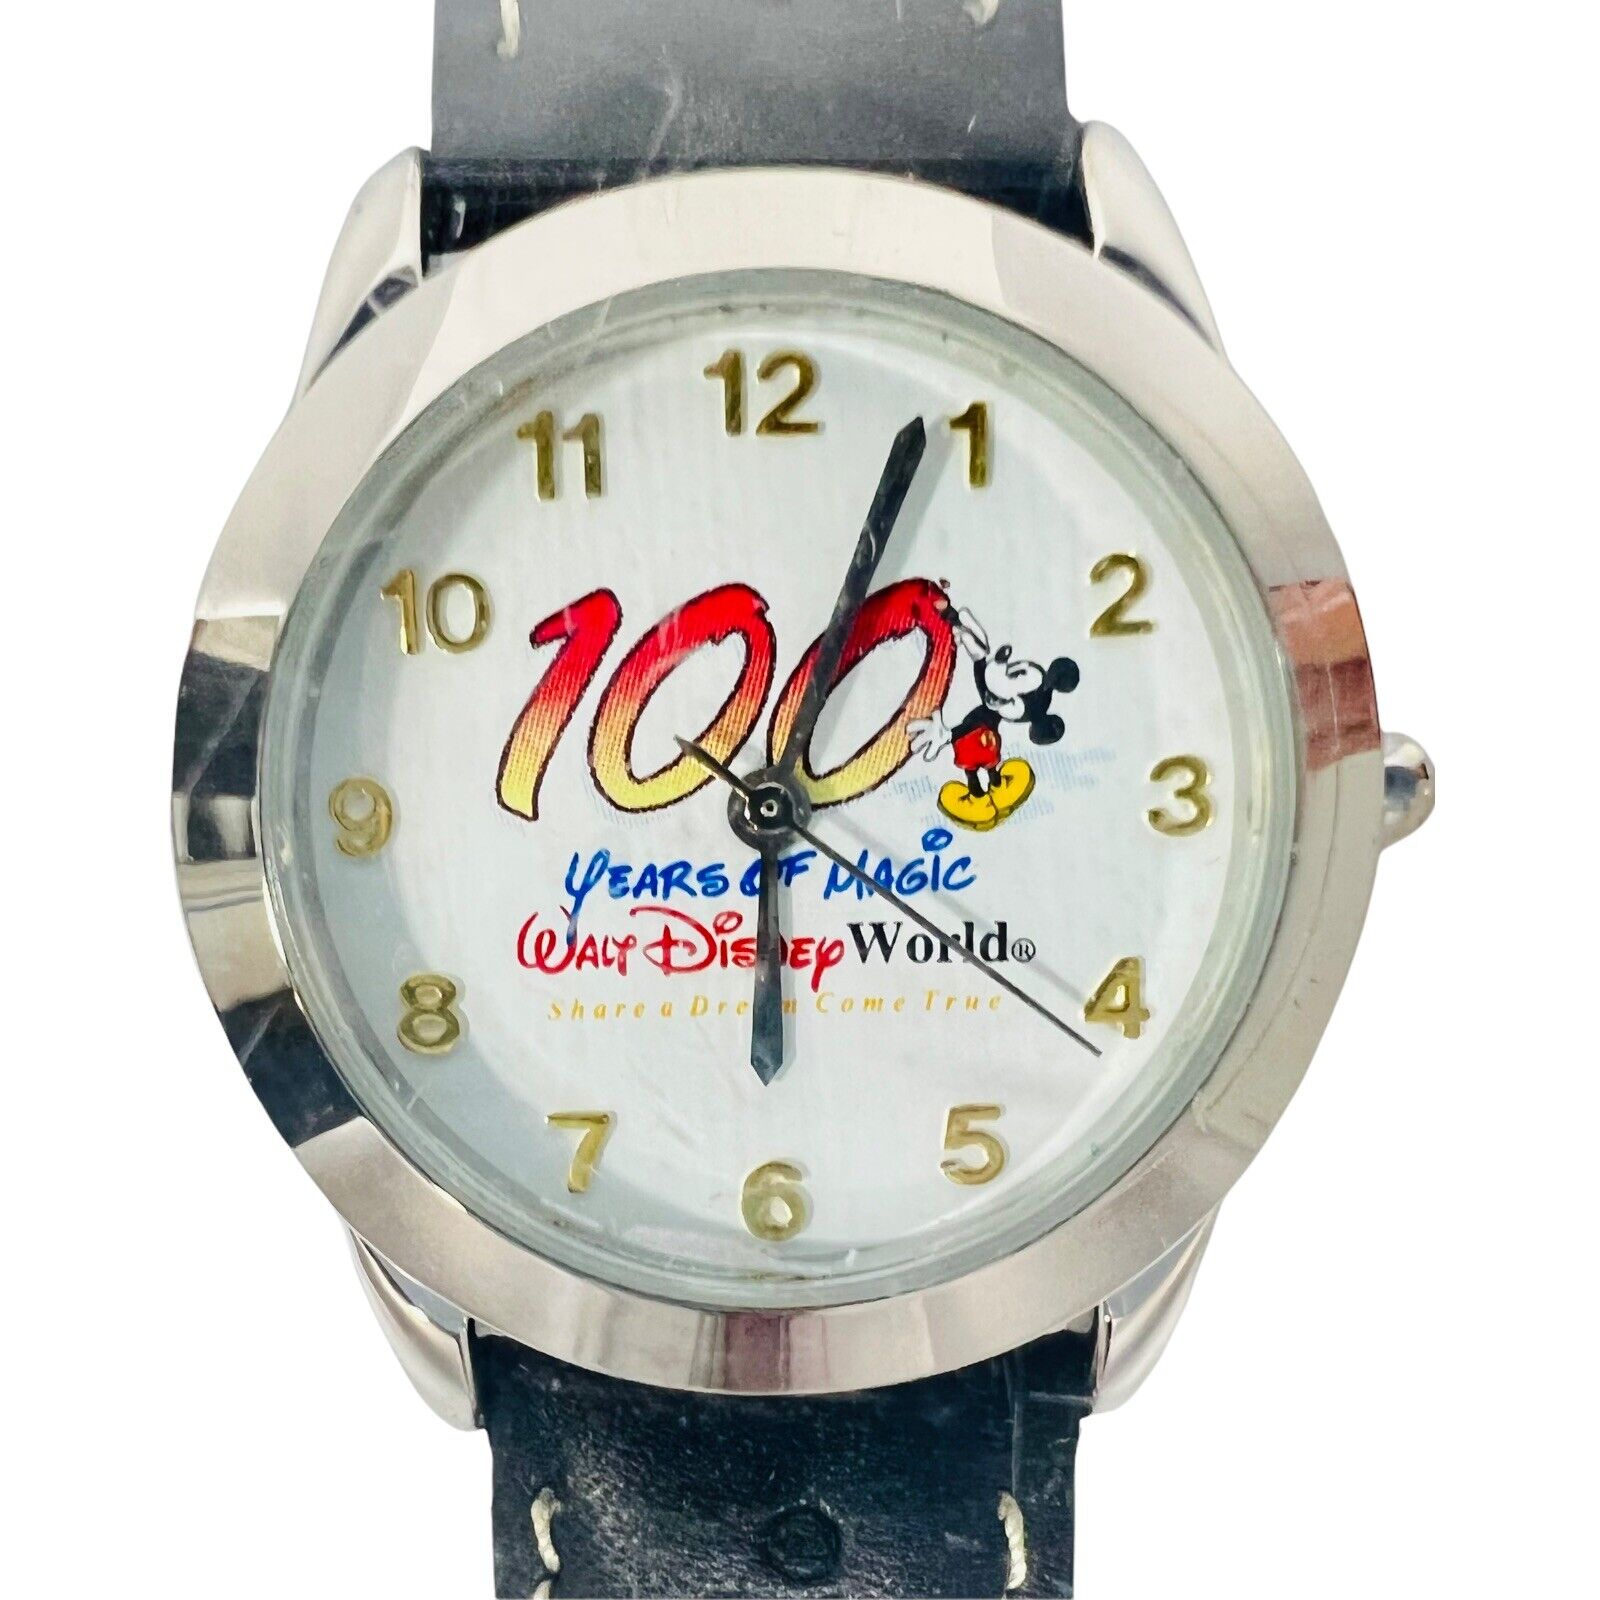 WDW Mickey Mouse Watch Black Leather Band 100 Years Of Magic Time Works SEALED